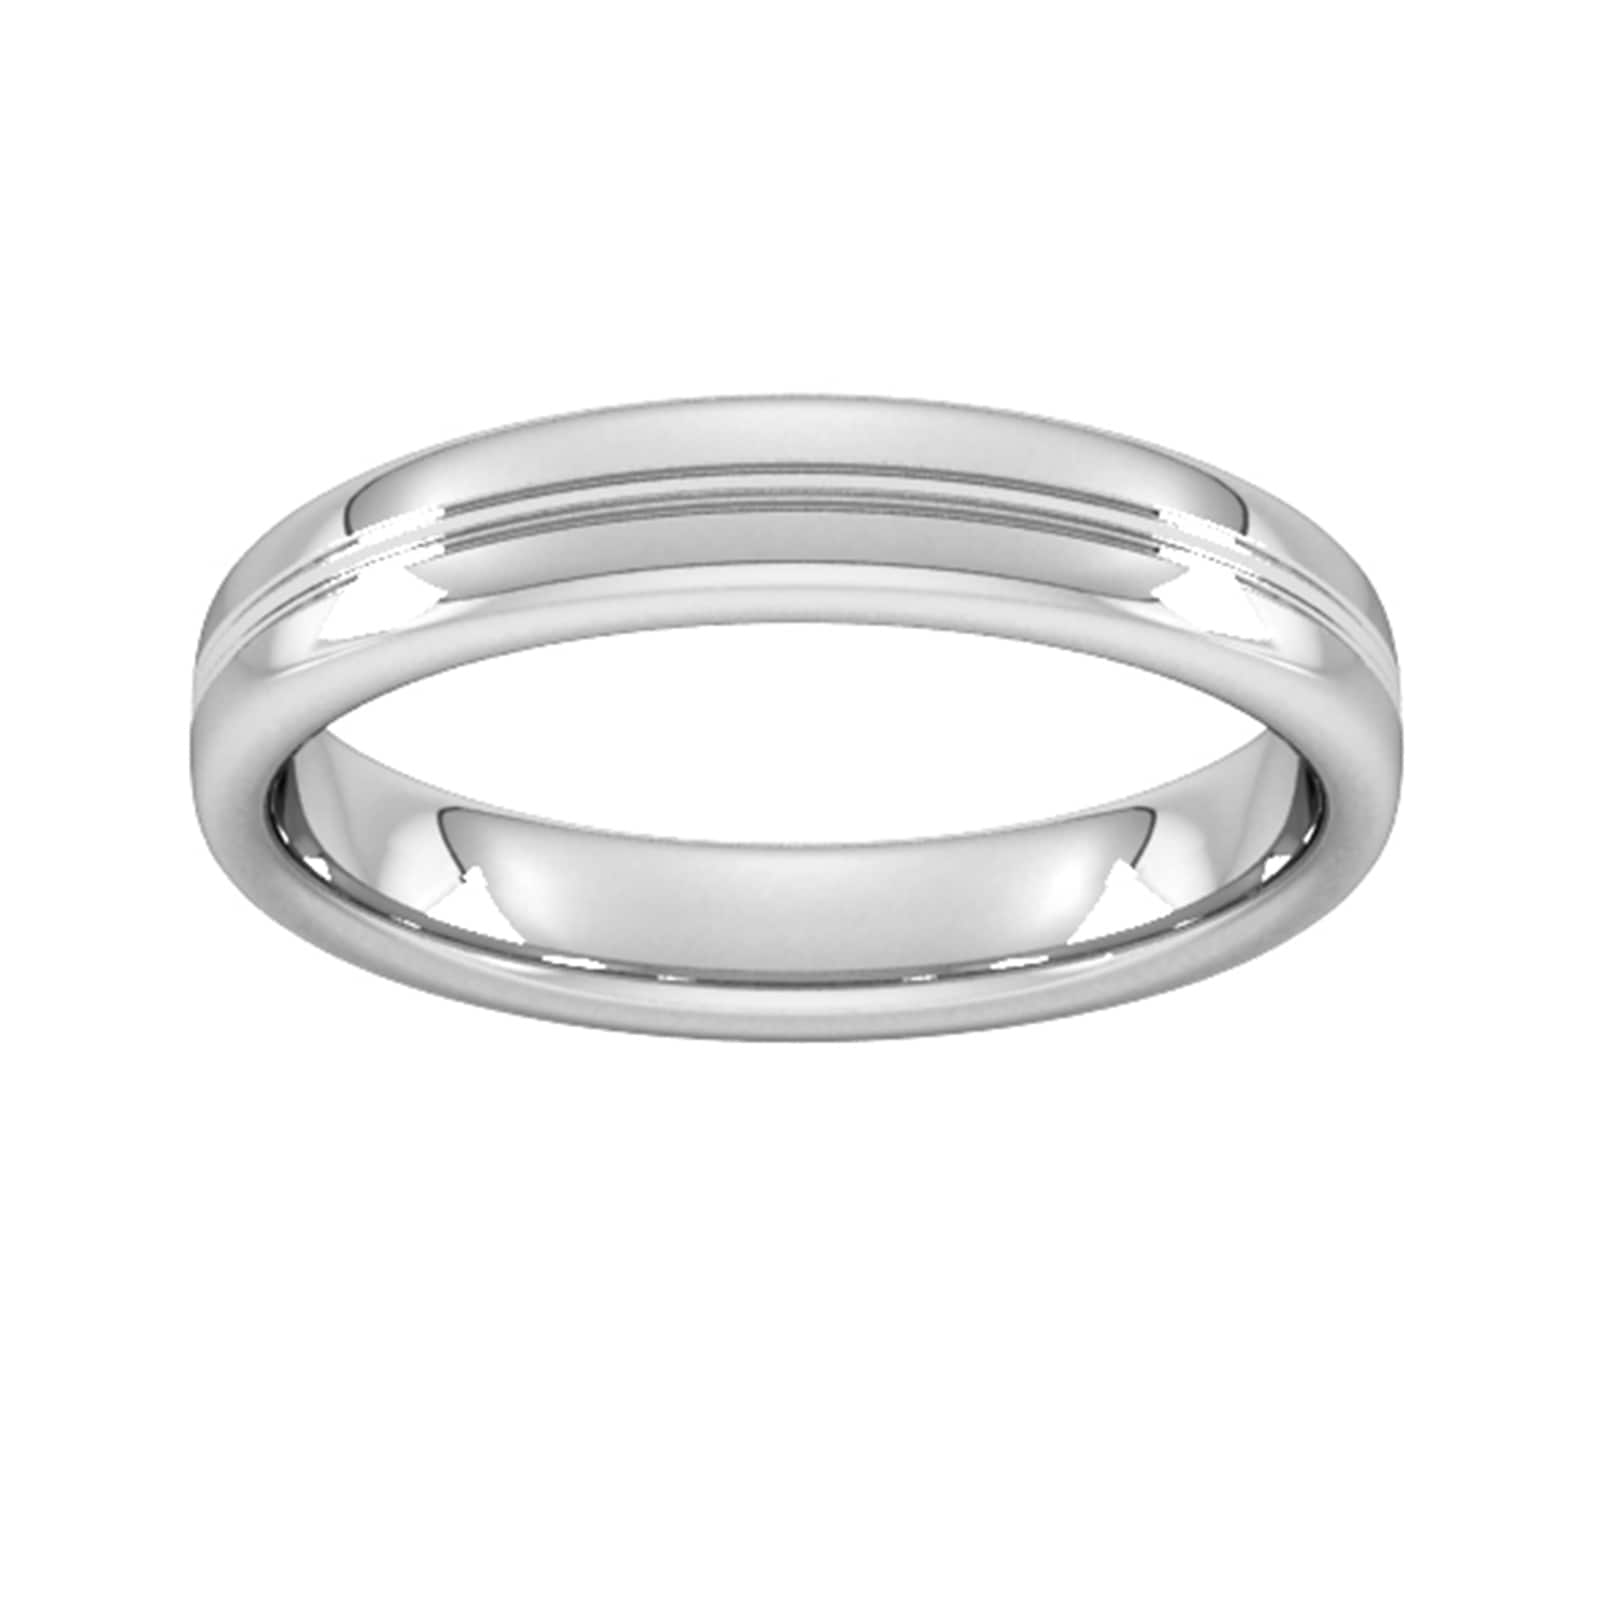 4mm Slight Court Extra Heavy Grooved Polished Finish Wedding Ring In 950 Palladium - Ring Size H